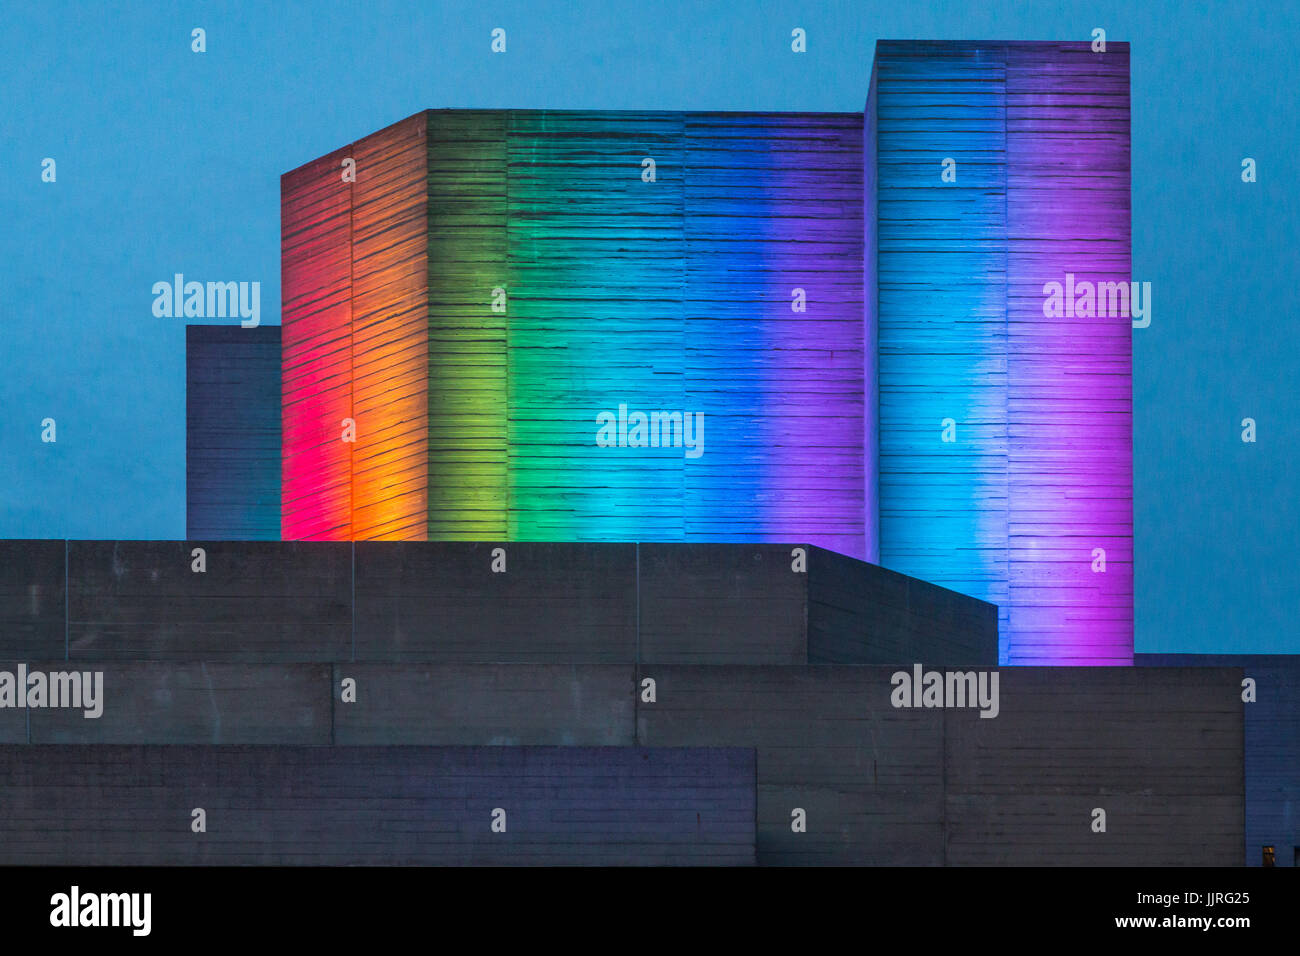 National Theatre lit up in rainbow lights to mark London's Gay Pride celebrations Stock Photo